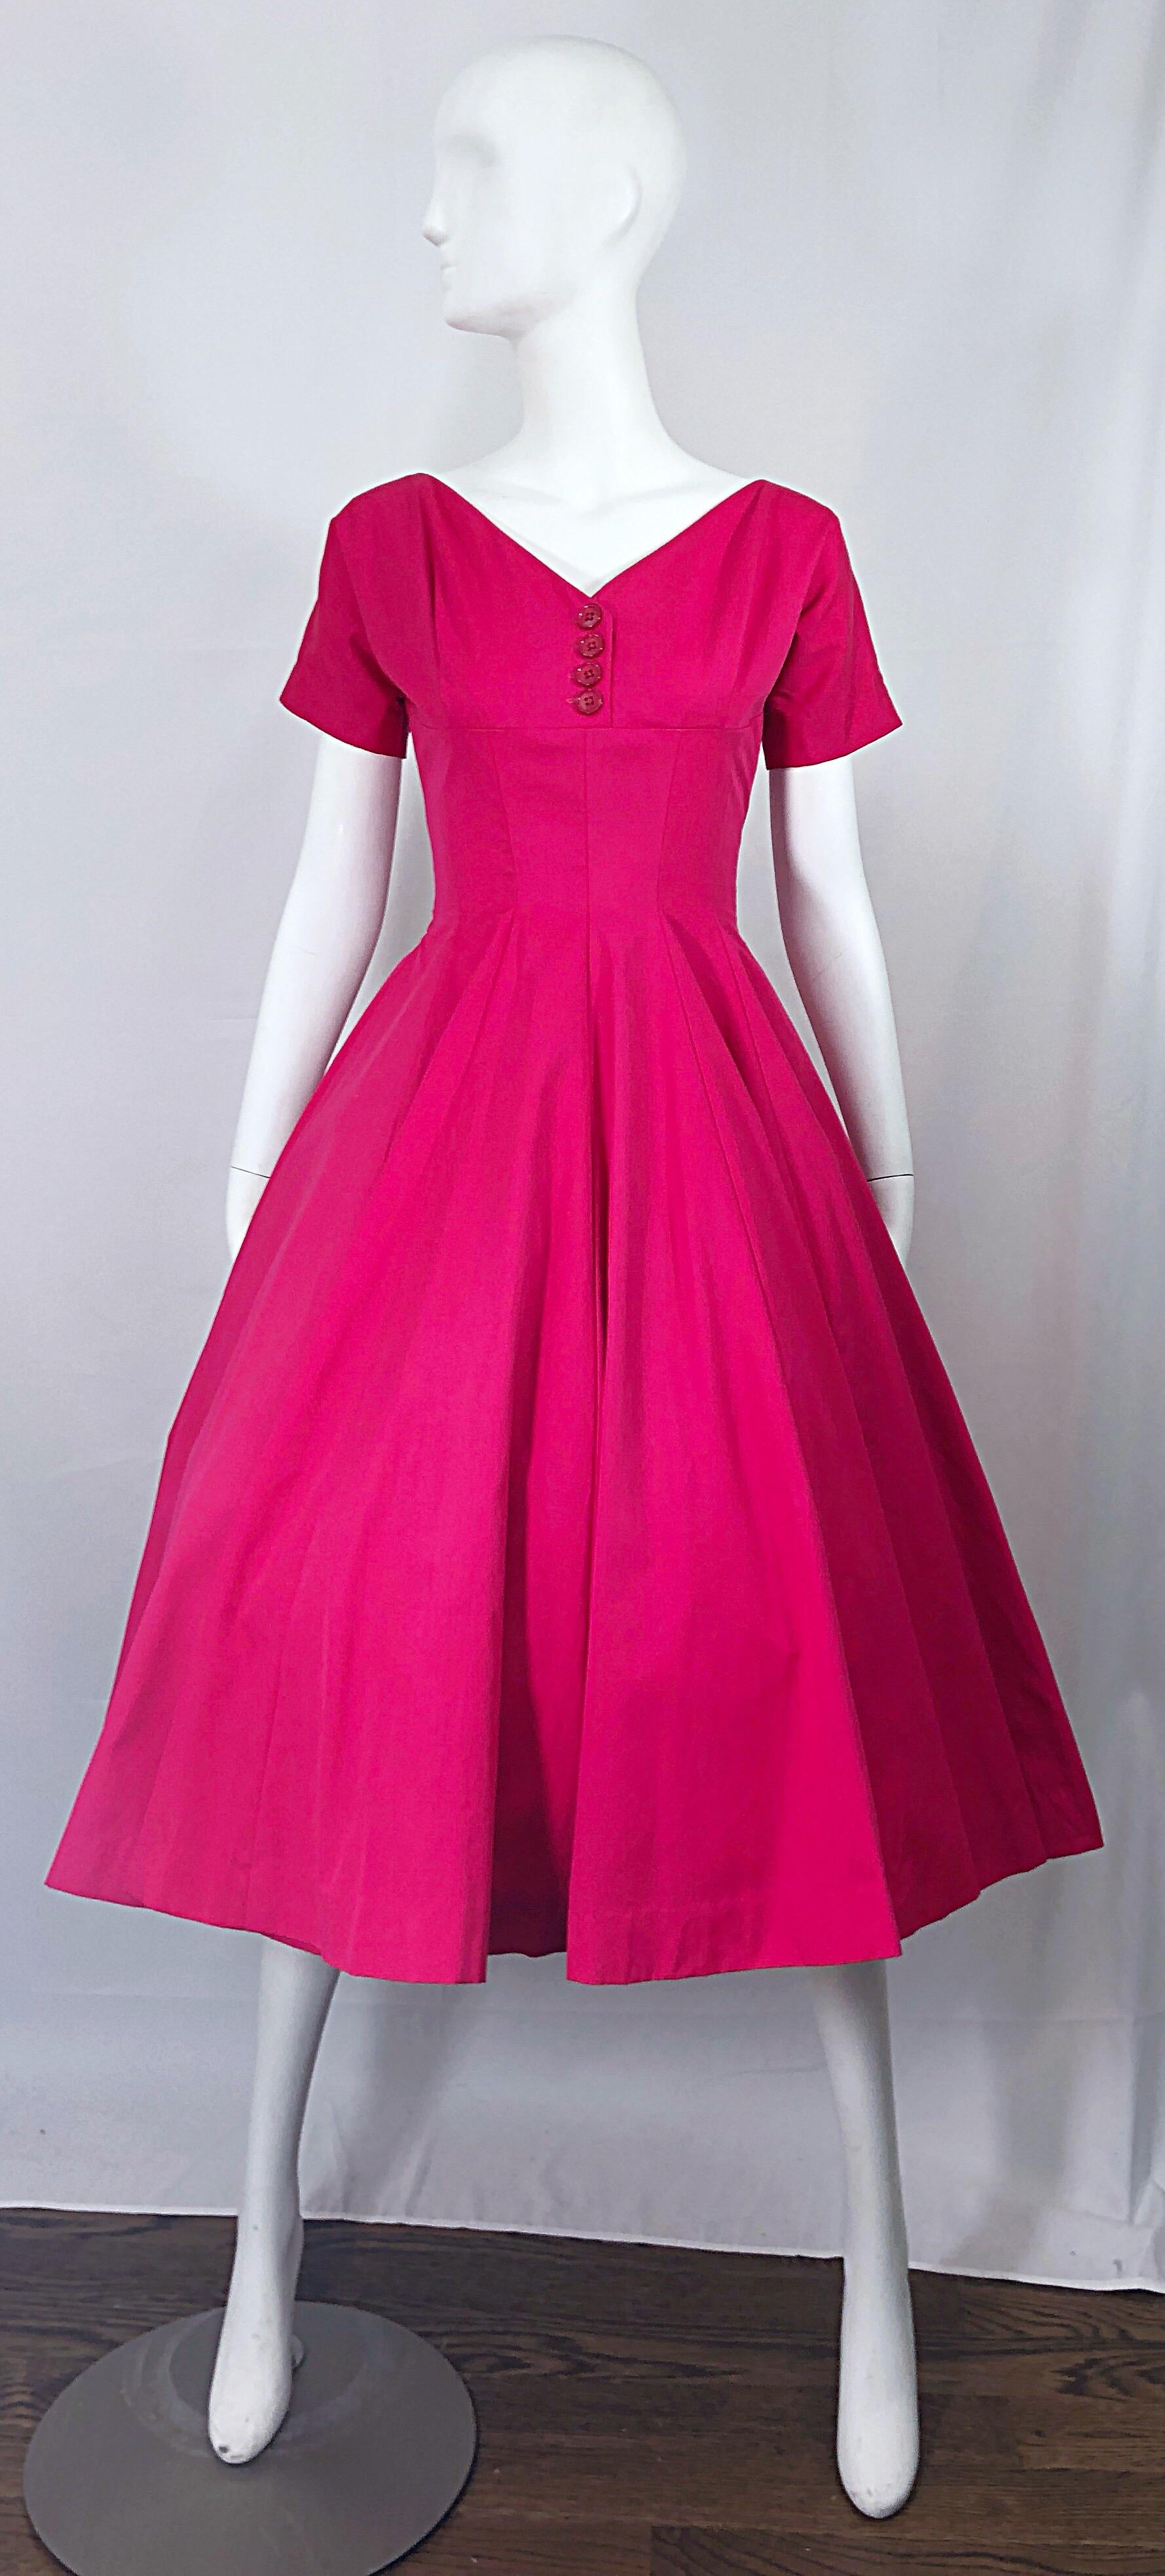 Beautiful 1950s ANNE FOGARTY hot pink silk / rayon fit n' flare 'New Look' cocktail dress! Features a fitted bodice with mock pink buttons at center bust. Flattering full skirt can accomodate a crinoline for extra fullness. Full metal zipper up the